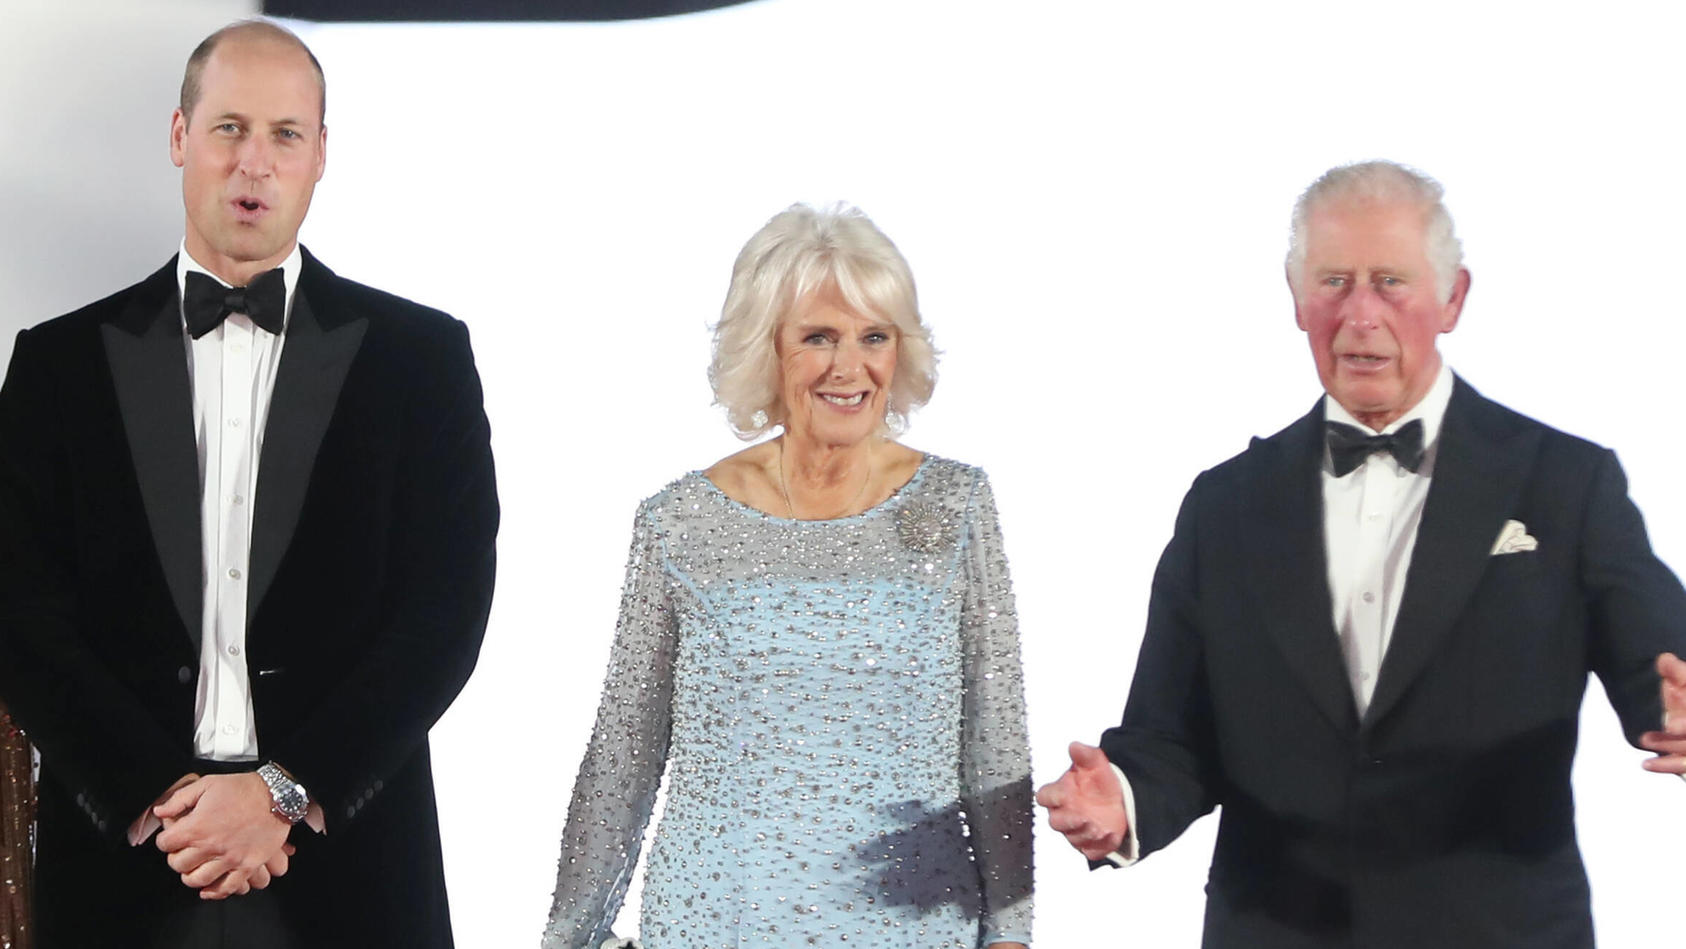  Catherine, Duchess of Cambridge, Prince William, Duke of Cambridge, Camilla, Duchess of Cornwall and Charles, Prince of Wales attend the World Premiere of No Time To Die at the Royal Albert Hall in London, SEPTEMBER 28th 2021 PUBLICATIONxINxGERxSUIx